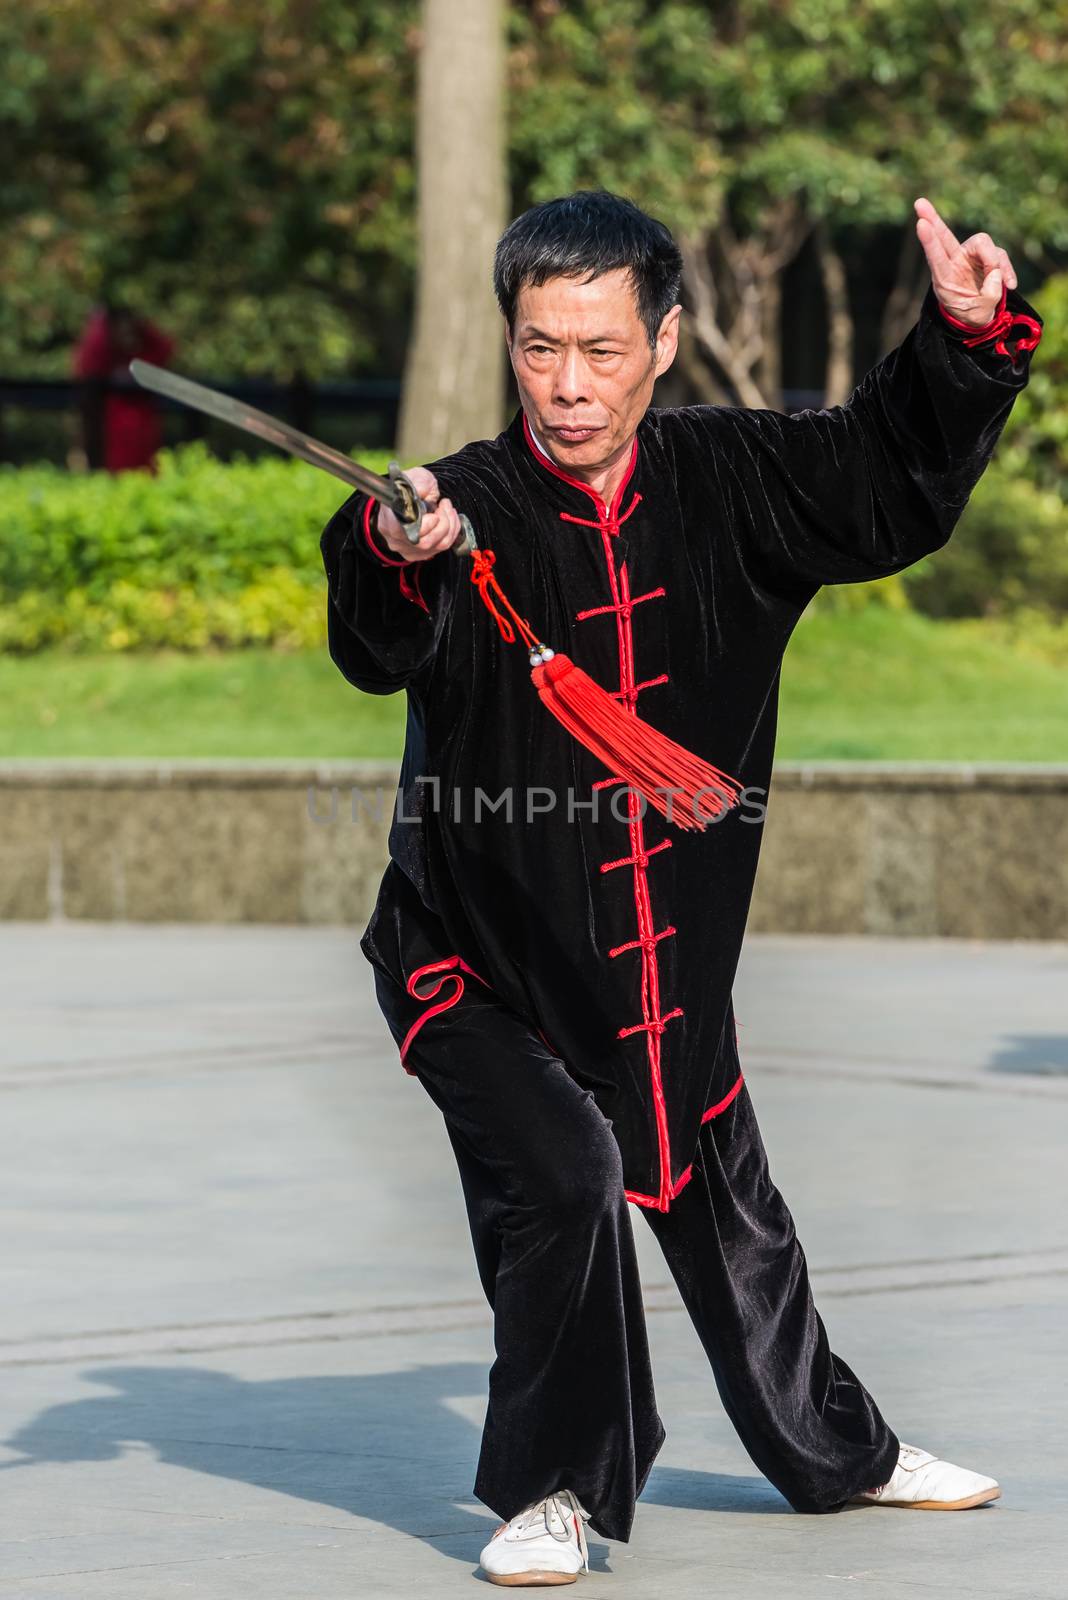 Shanghai, China - April 7, 2013: one man exercising tai chi with traditional costume in gucheng park in the city of Shanghai in China on april 7th, 2013